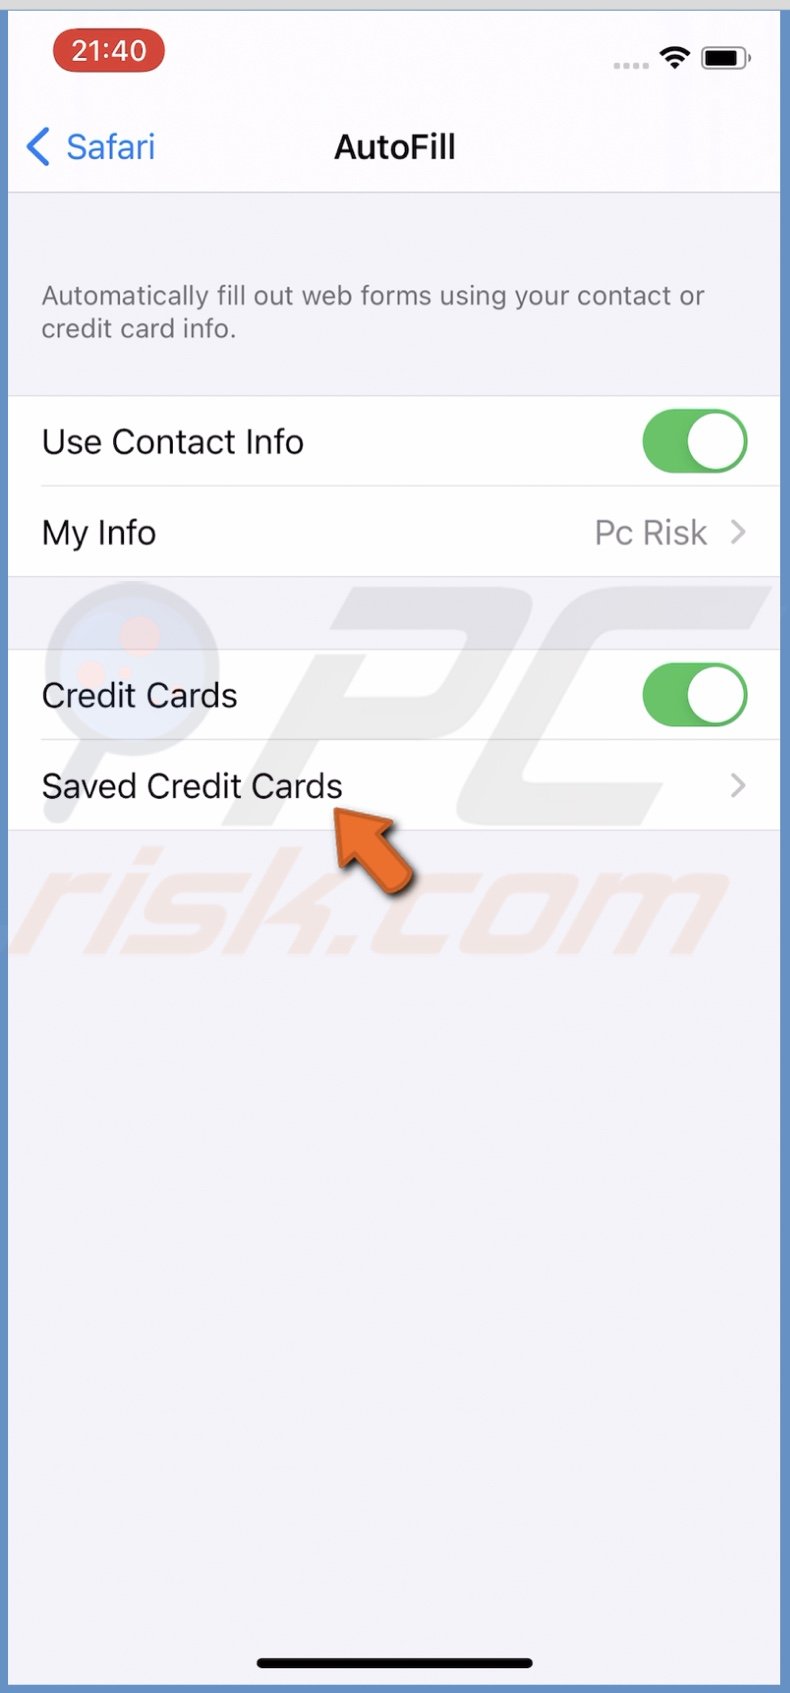 Tap on Saved Credit Cards